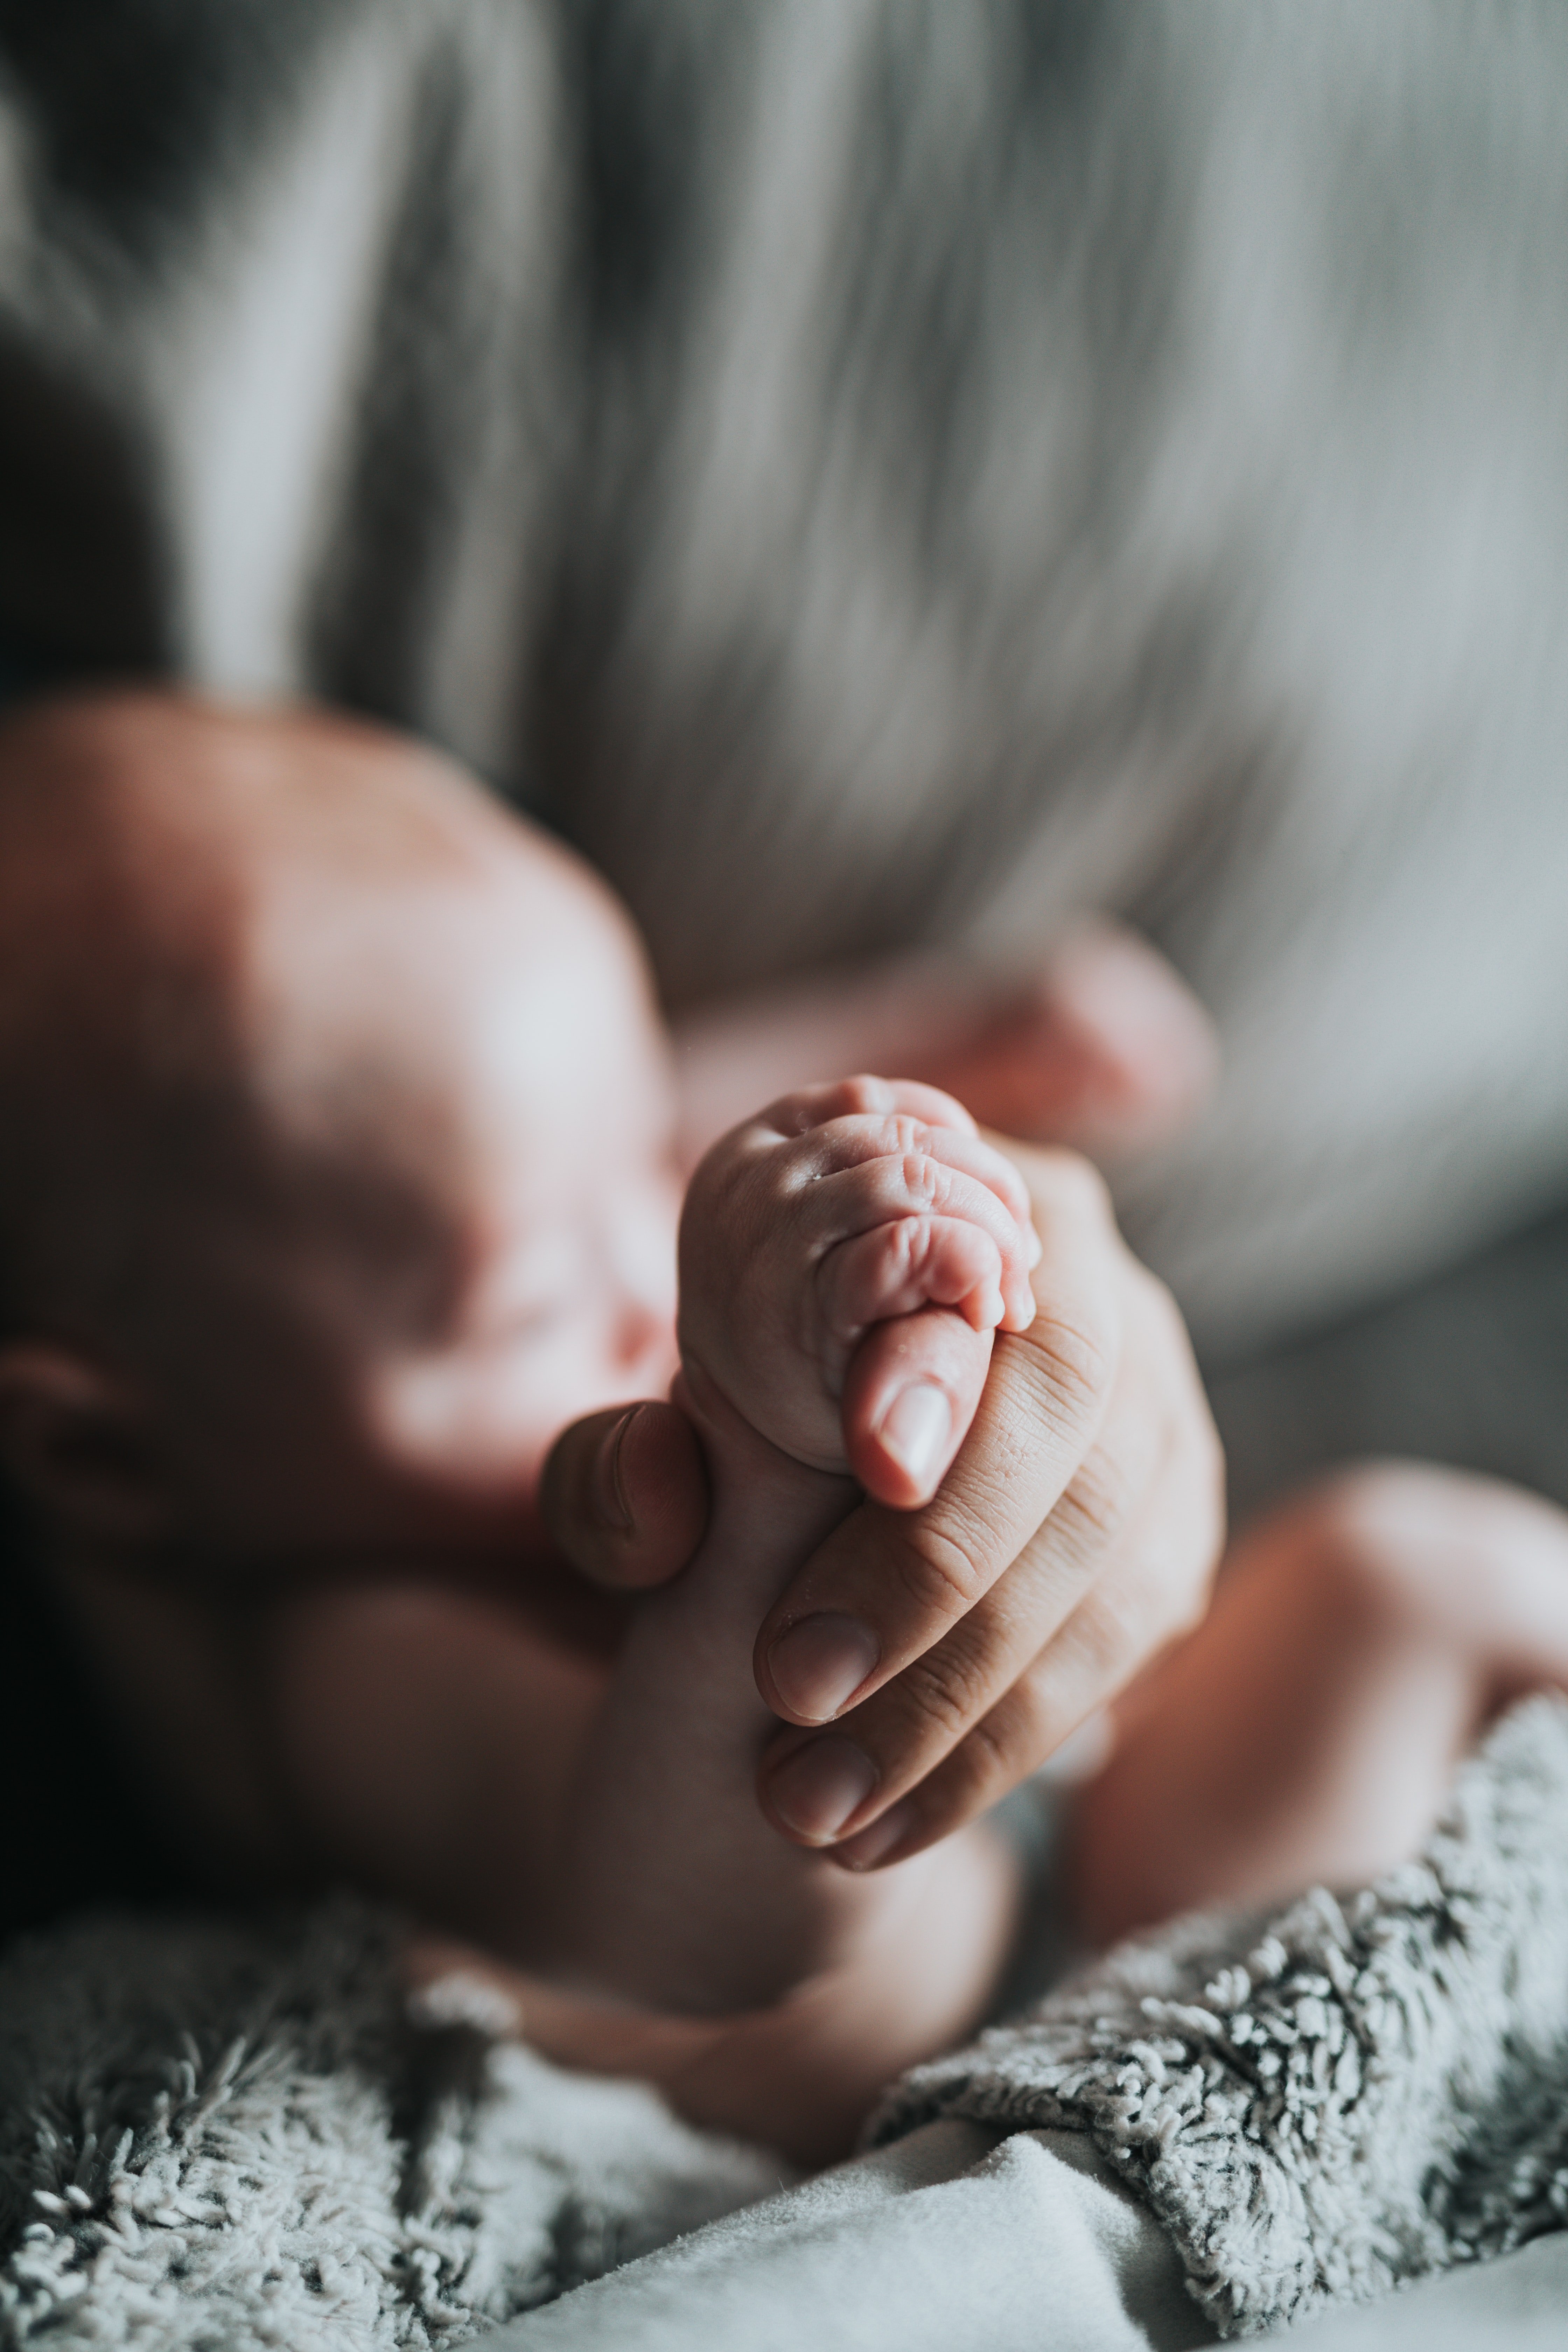 Millie held her newborn baby in her arms and noticed a birthmark on his little arm. | Source: Unsplash